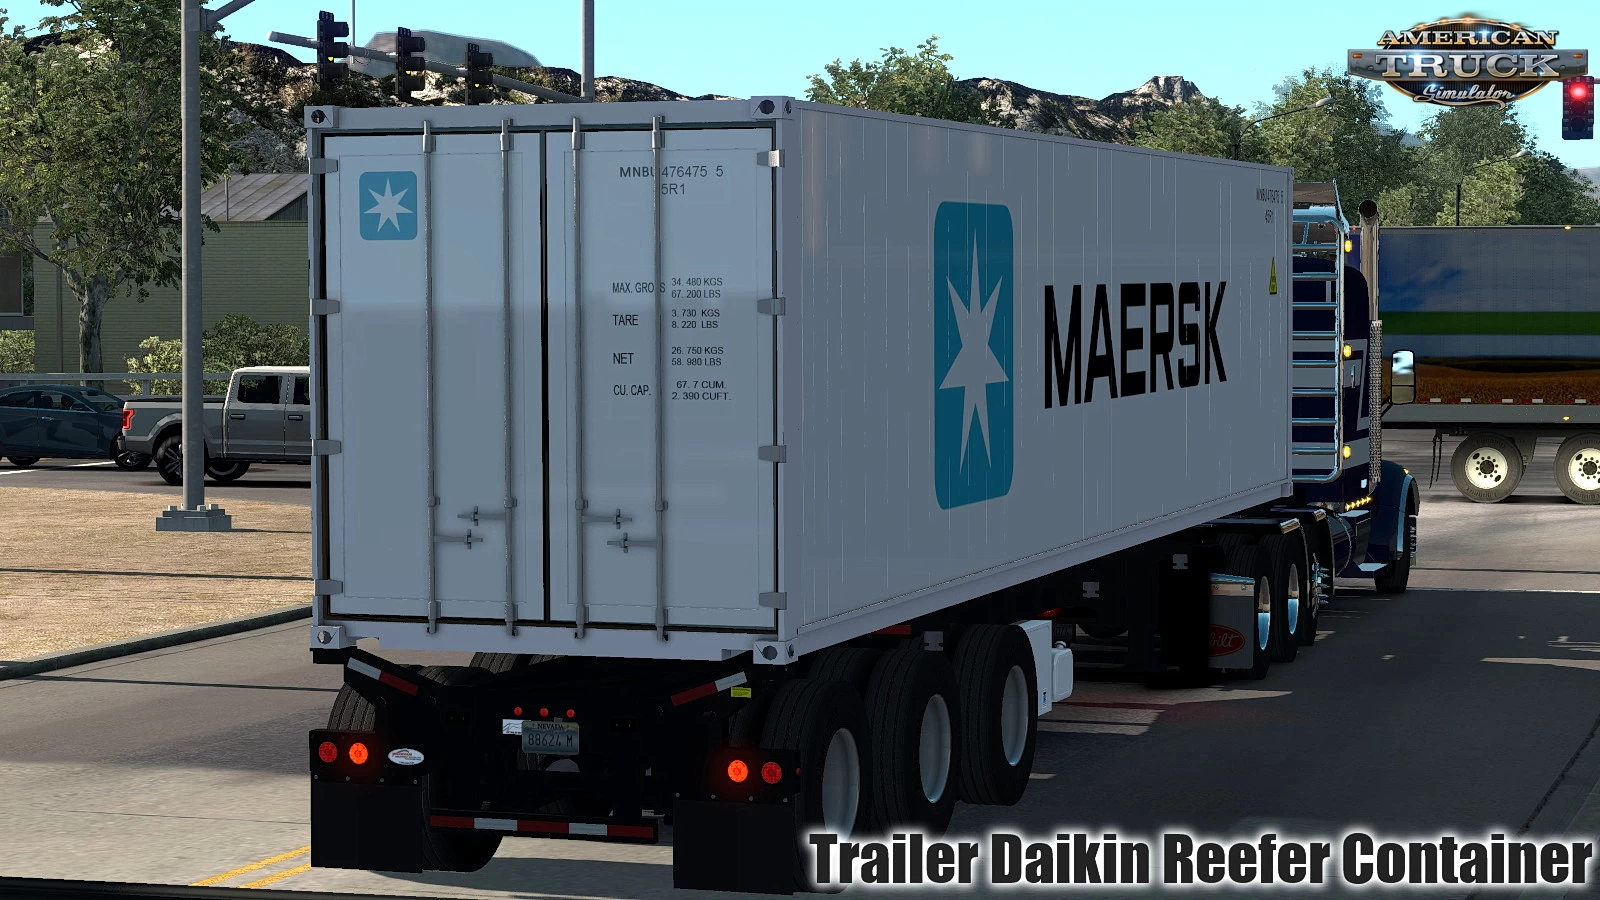 Trailer Daikin Reefer Container v1.1 (1.41.x) for ATS